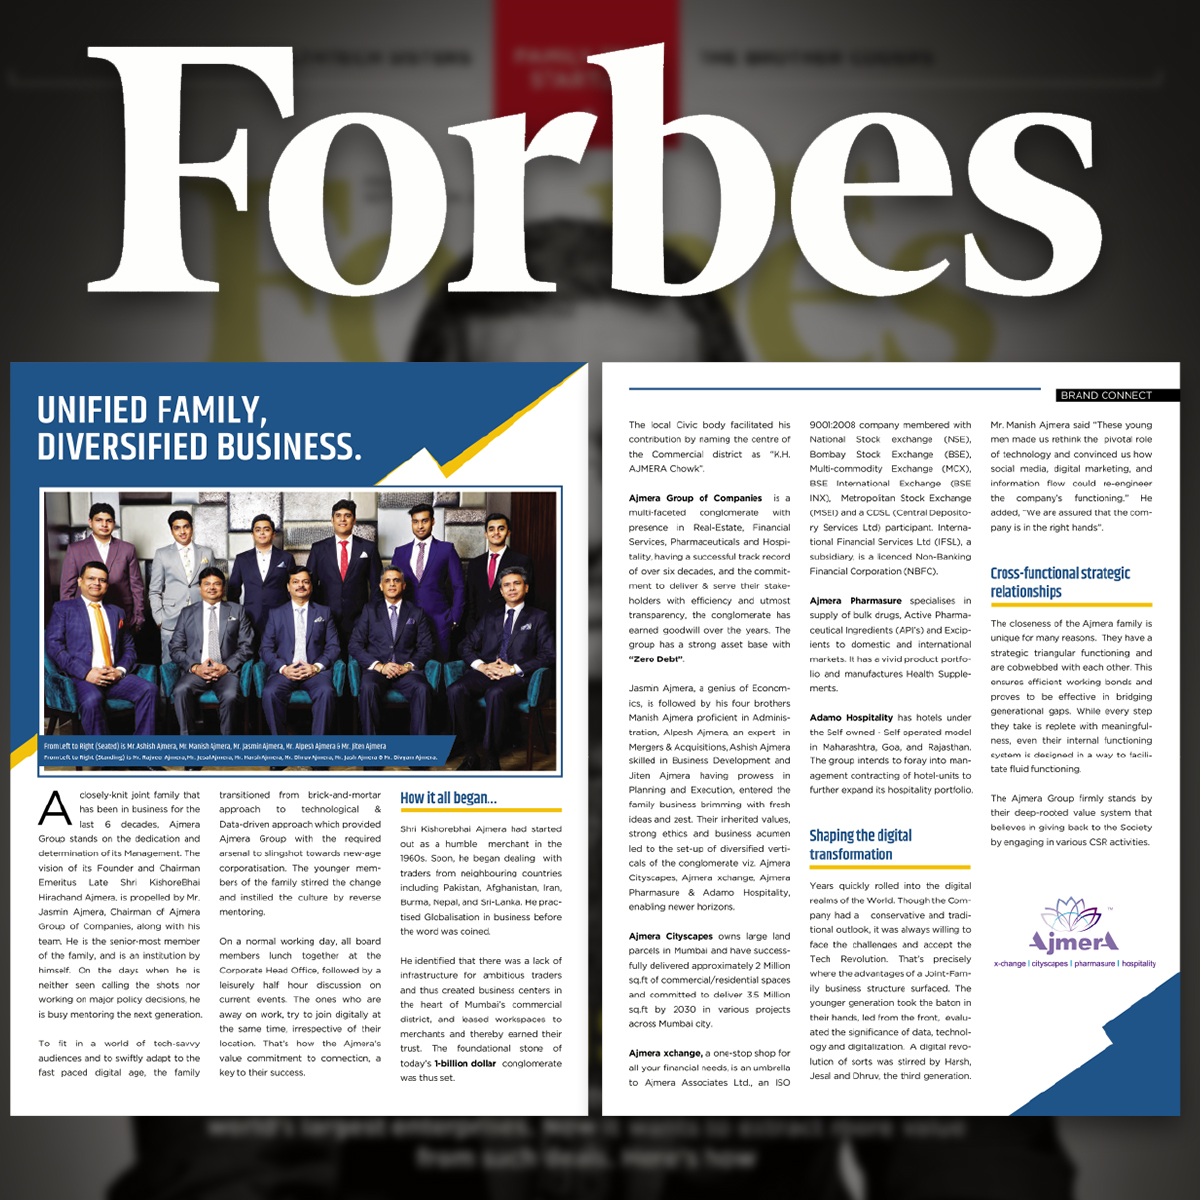 Unified Business Article Published in Forbes Magazine